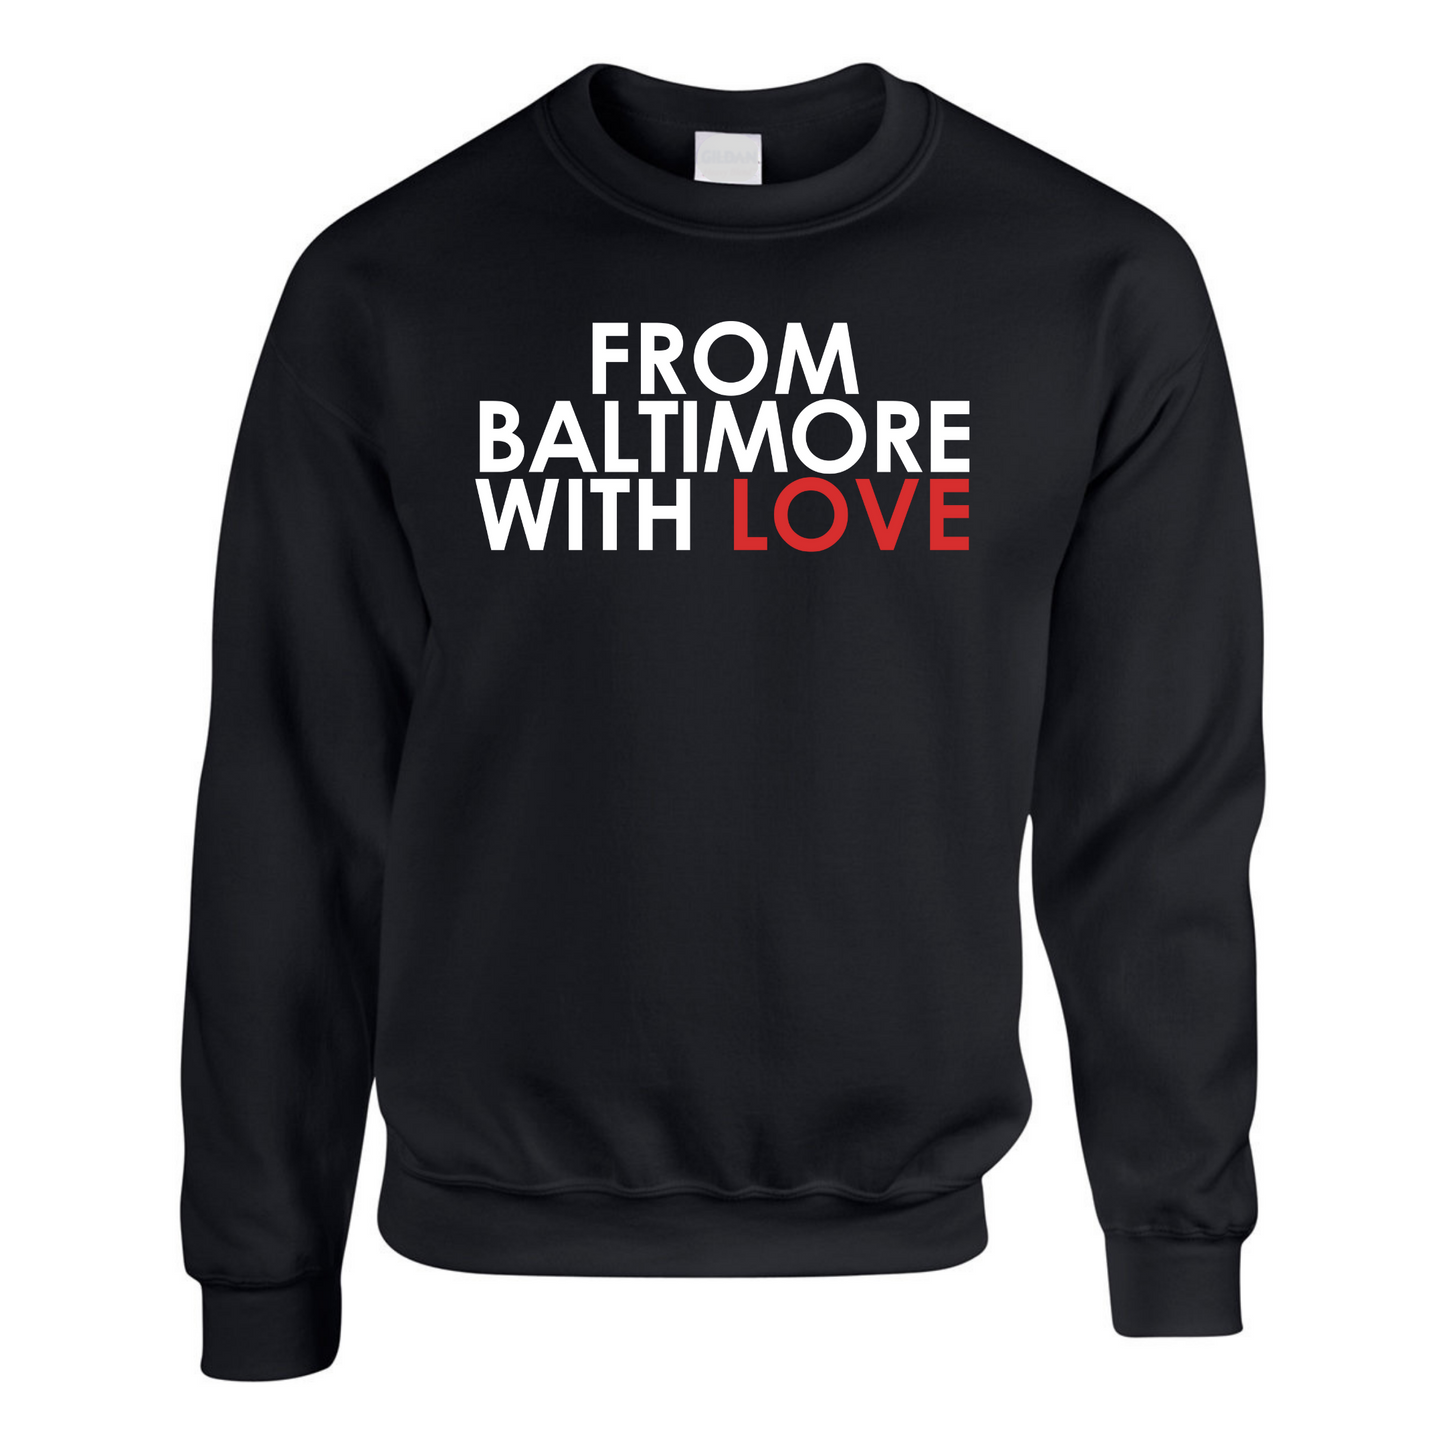 FROM BALTIMORE WITH LOVE CREWNECK